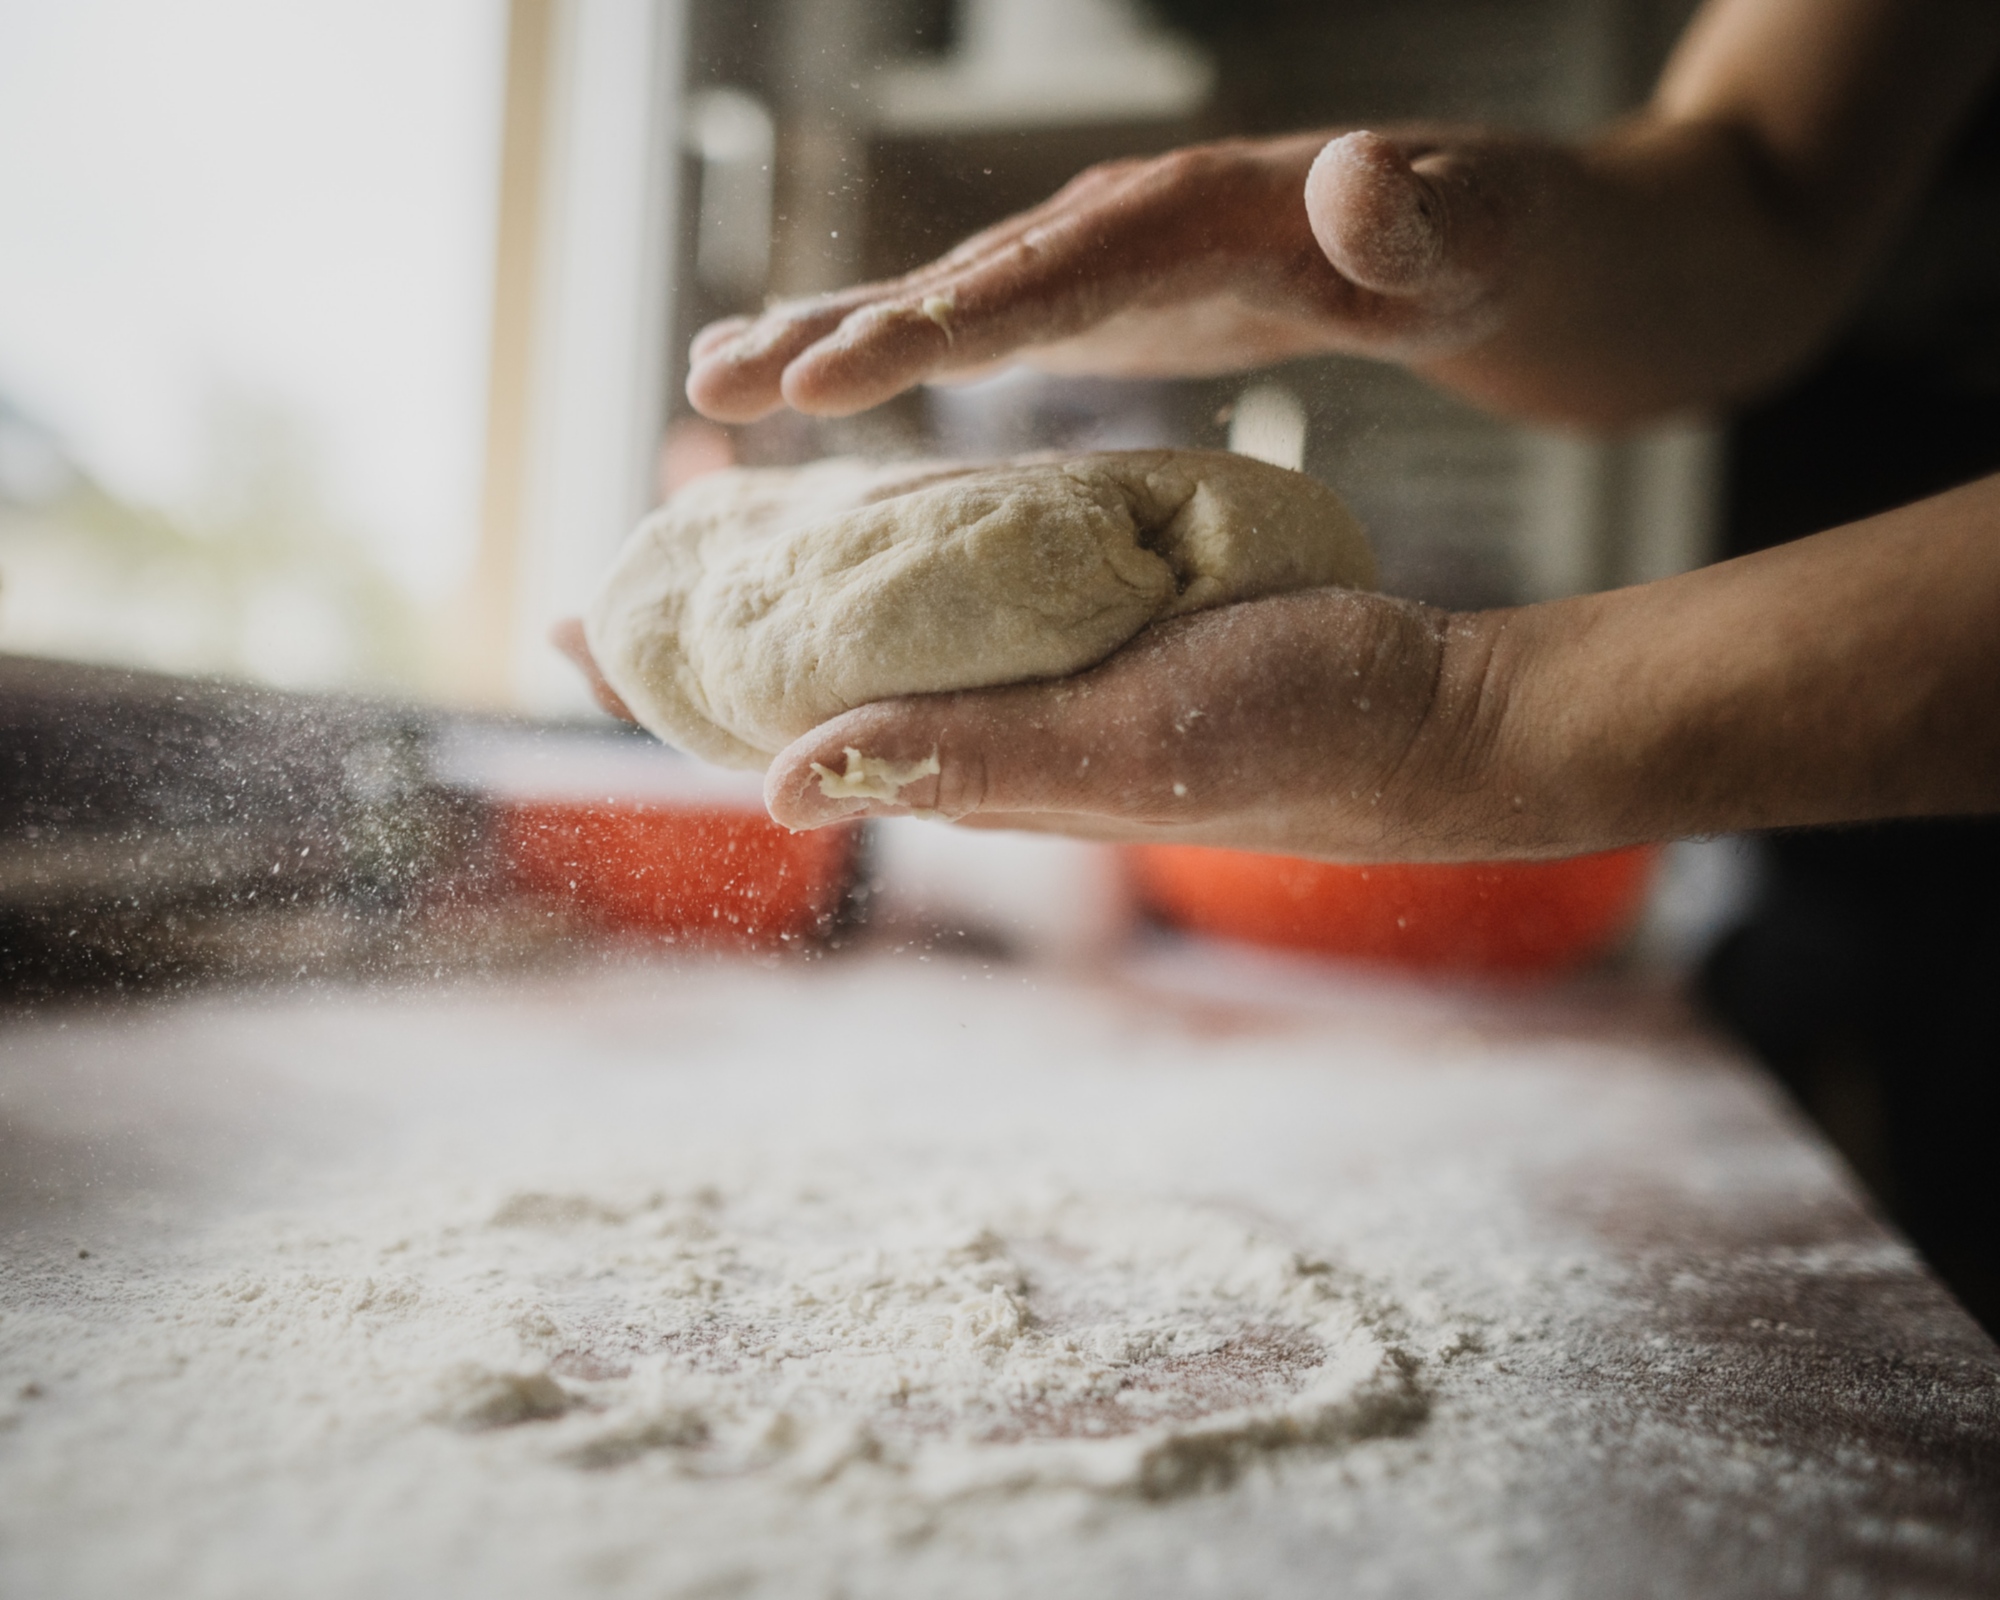 Cooking lesson to discover the secrets of making pizza and Tuscan focaccia